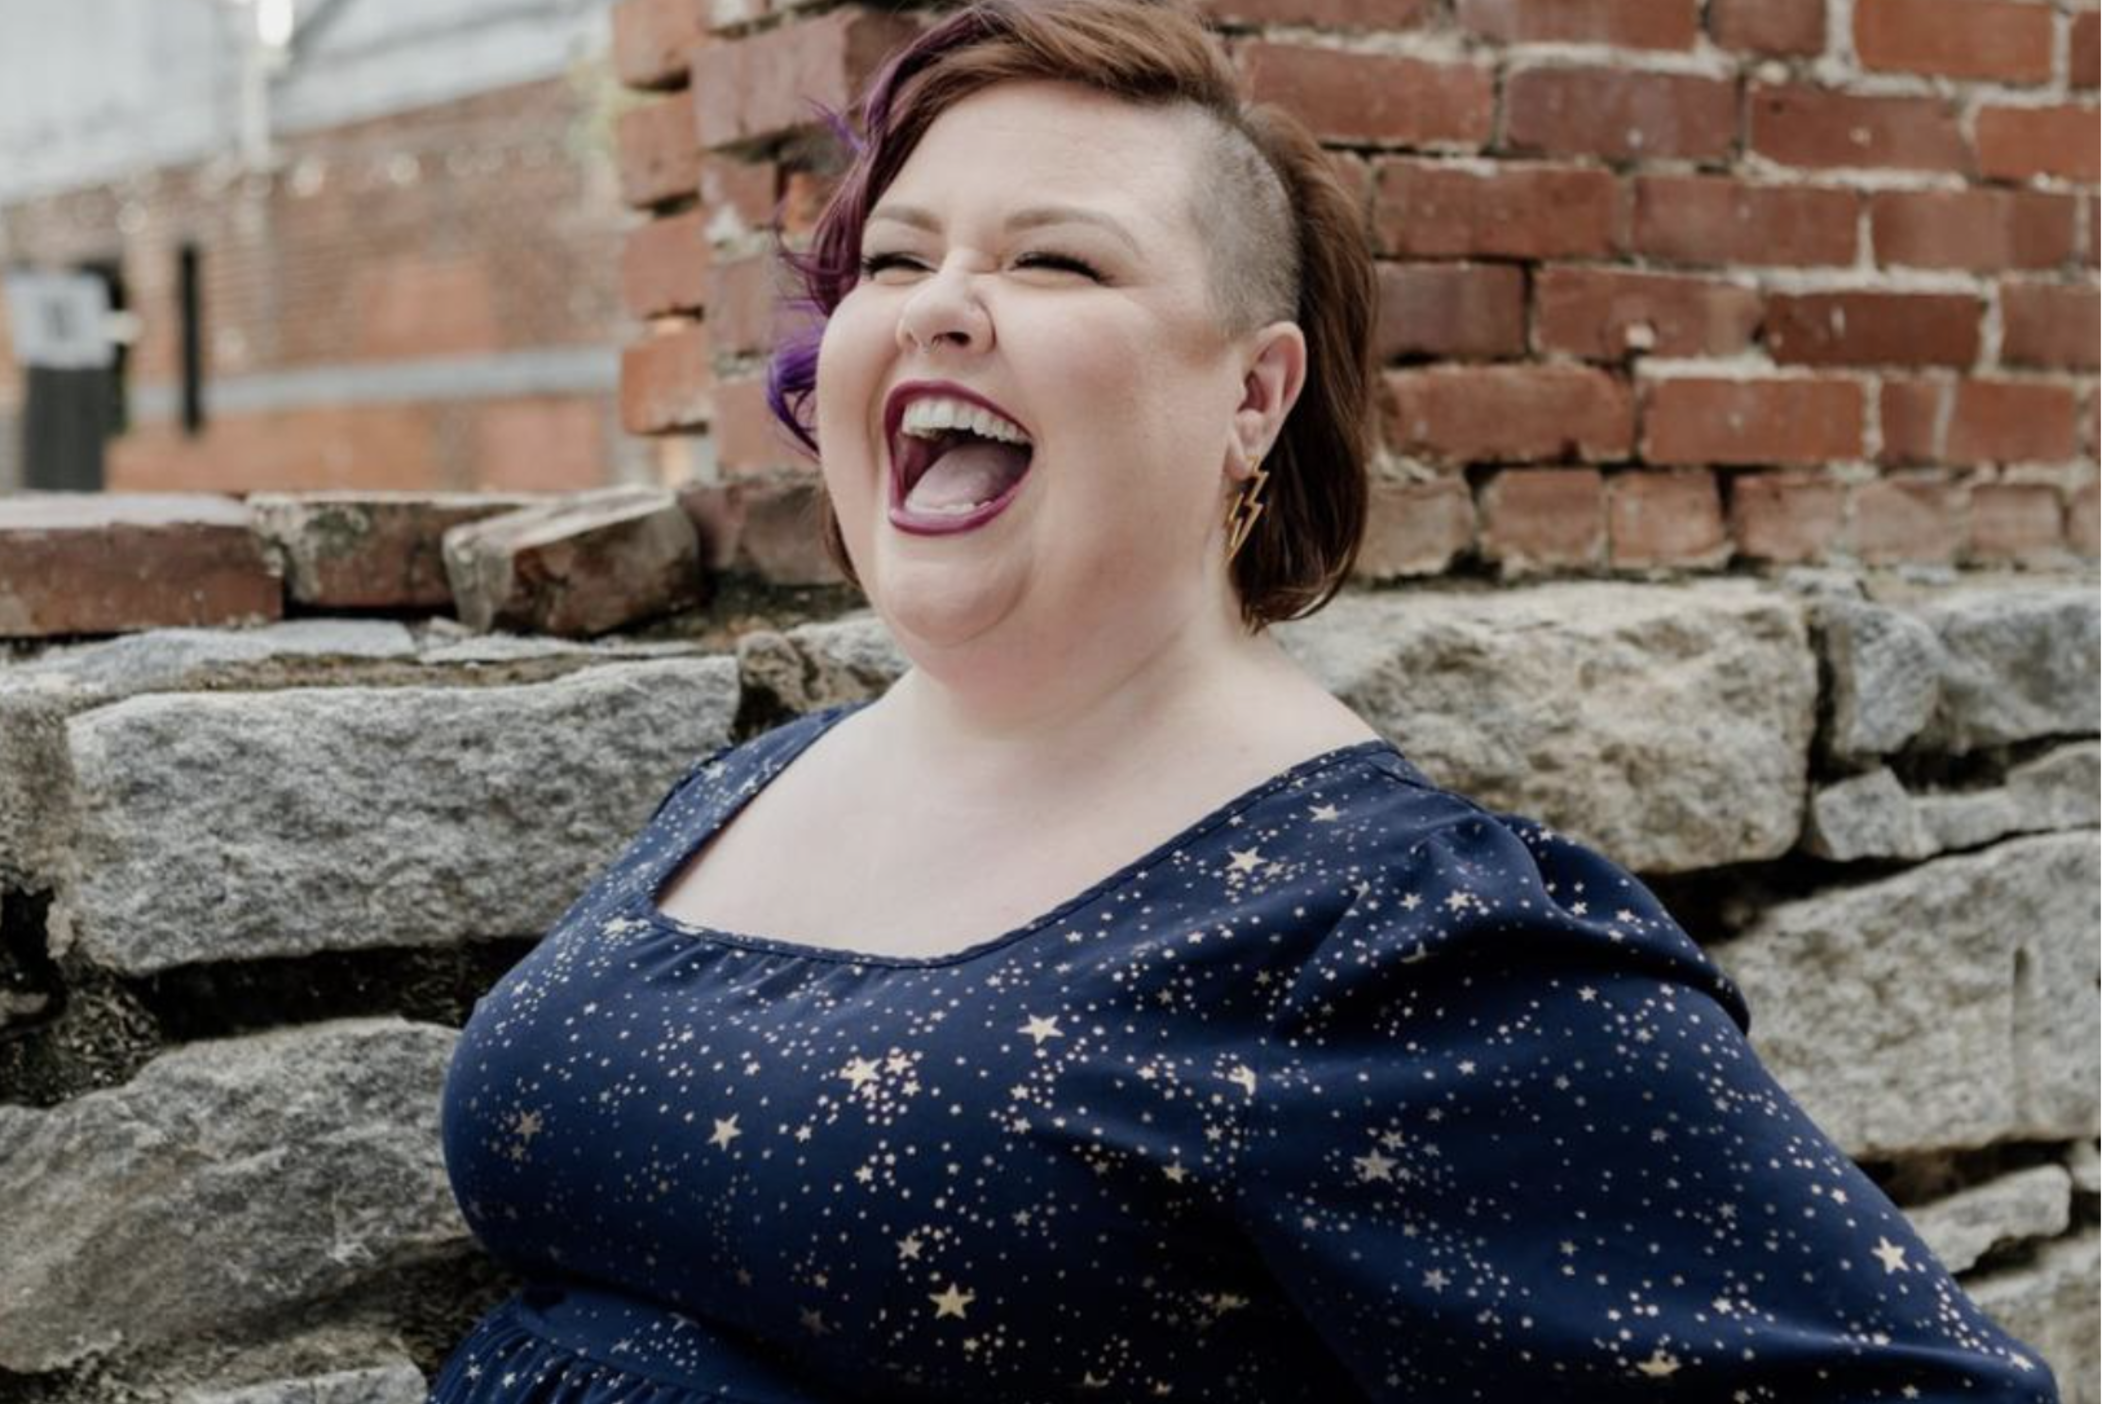 “ I didn't know this life could exist when I was growing up!" noted Mezzo-Soprano Jamie Barton of Rome, Georgia.